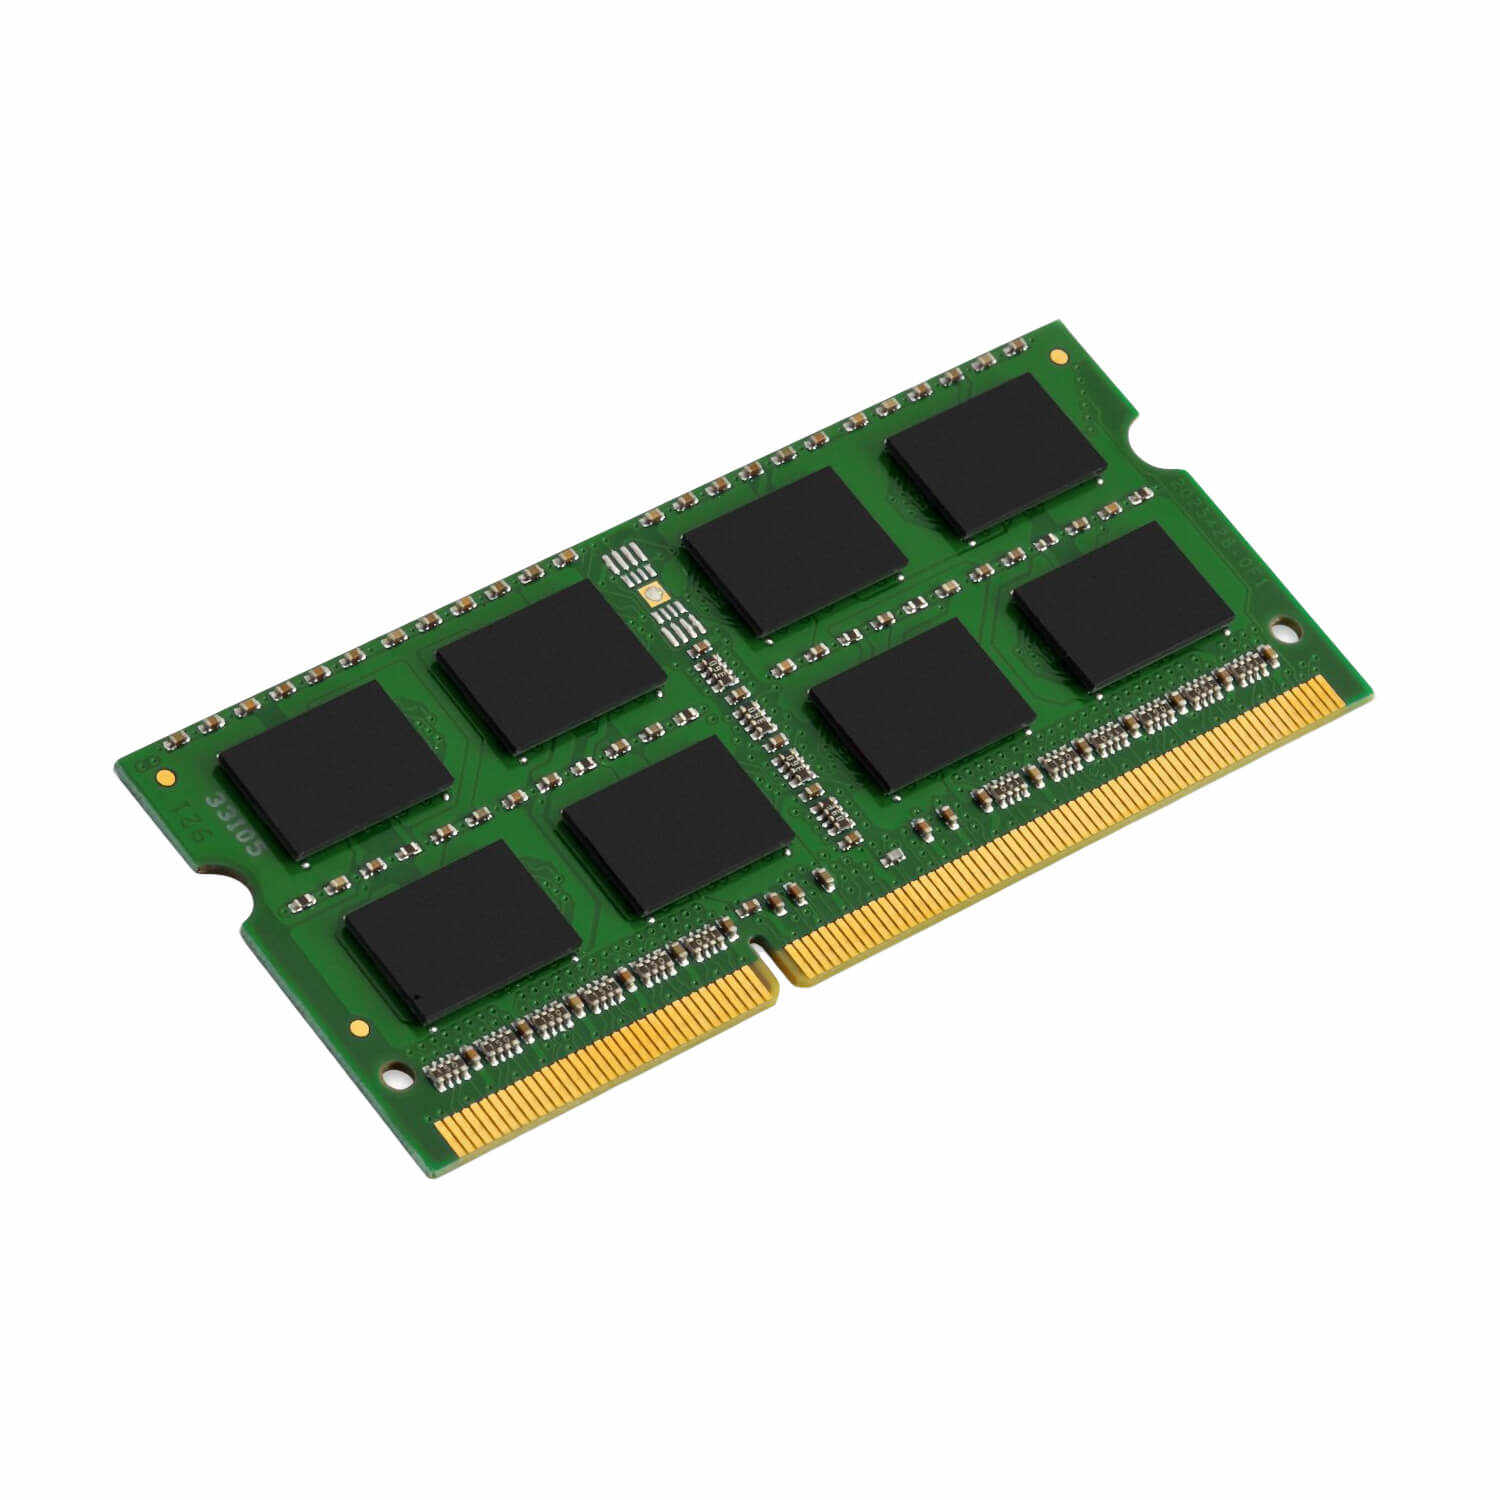 Memorie Kingston KCP316SS8/4, 4GB, DDR3, 1600MHz, CL11